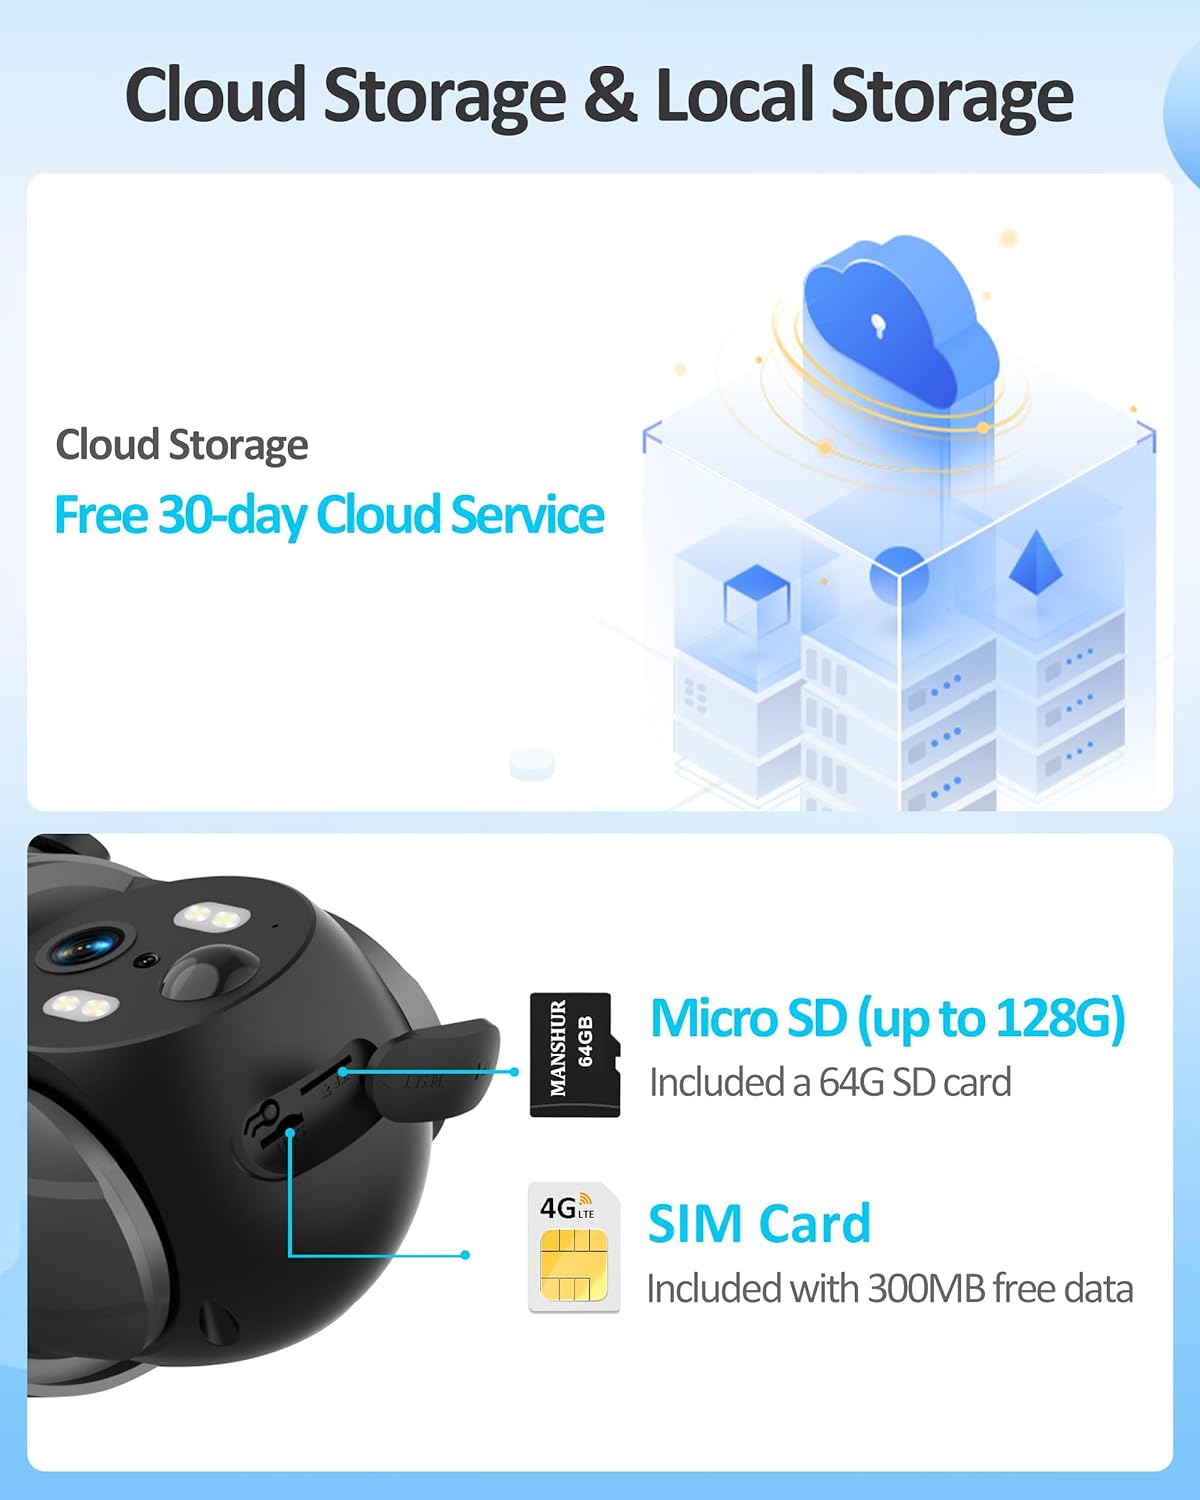 a free 64G SD card (support card storage up to 128GB) or cloud (30-day free trial)